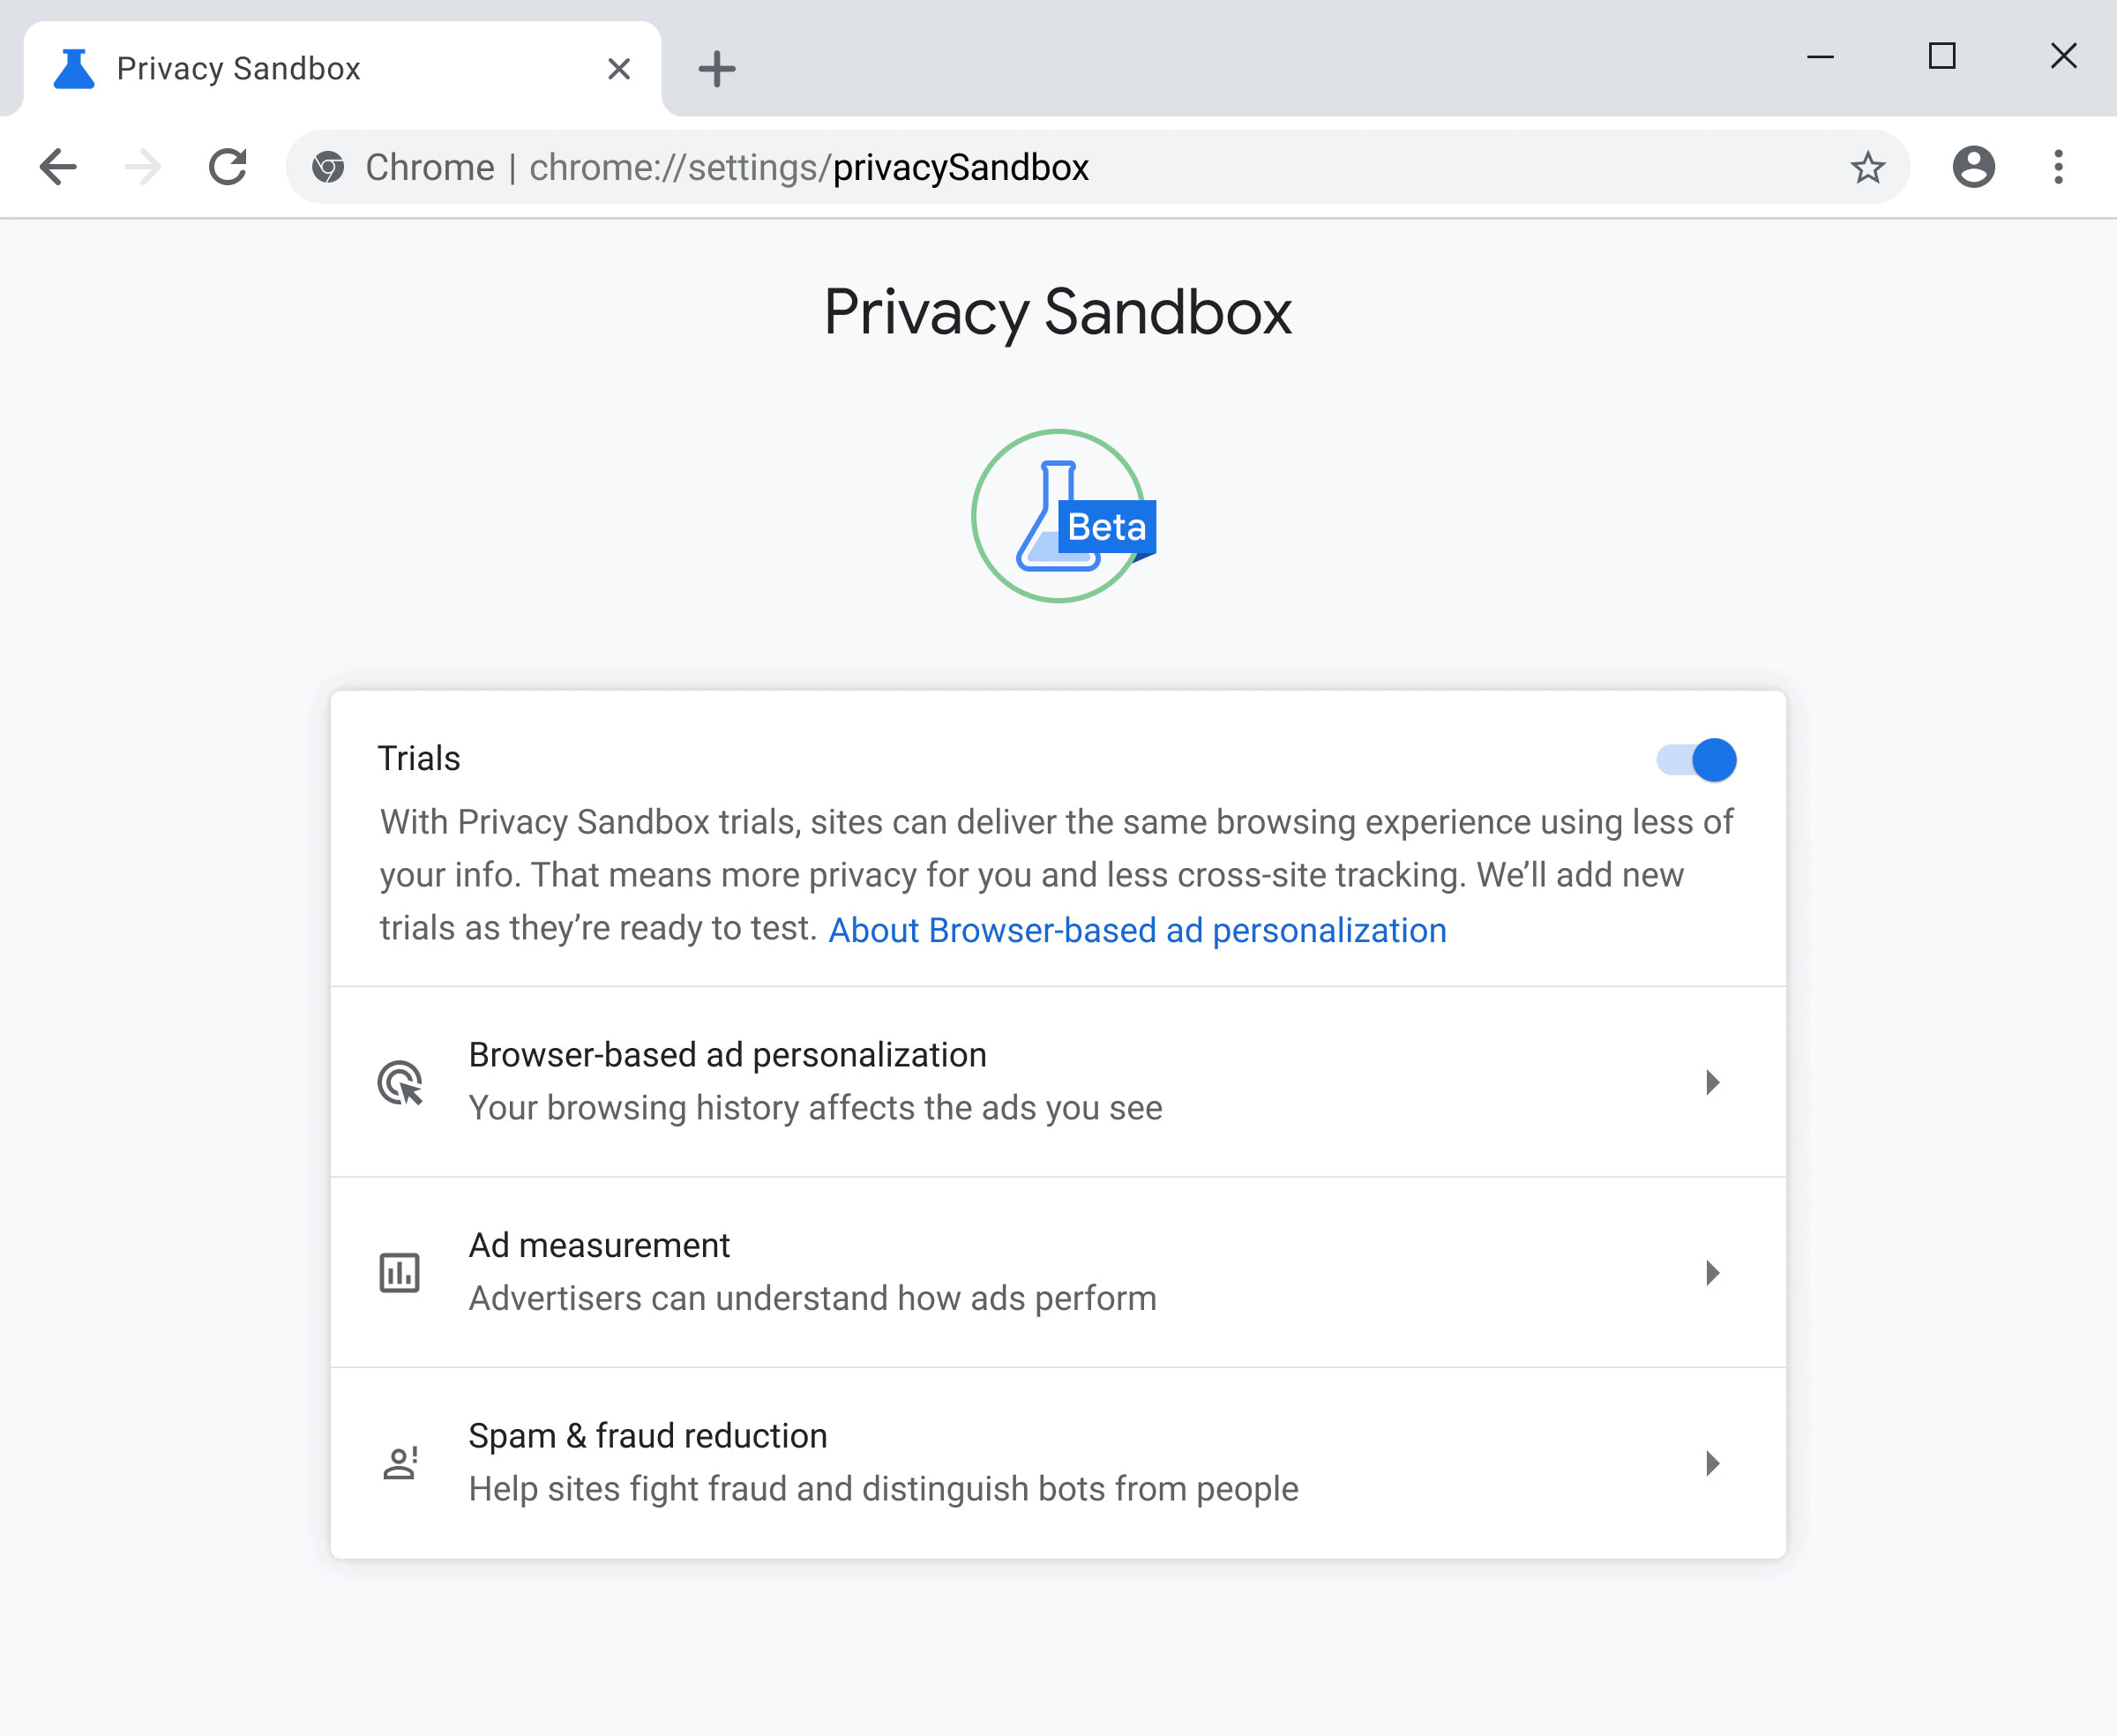 Privacy Sandbox Beta in Canary version of Chrome